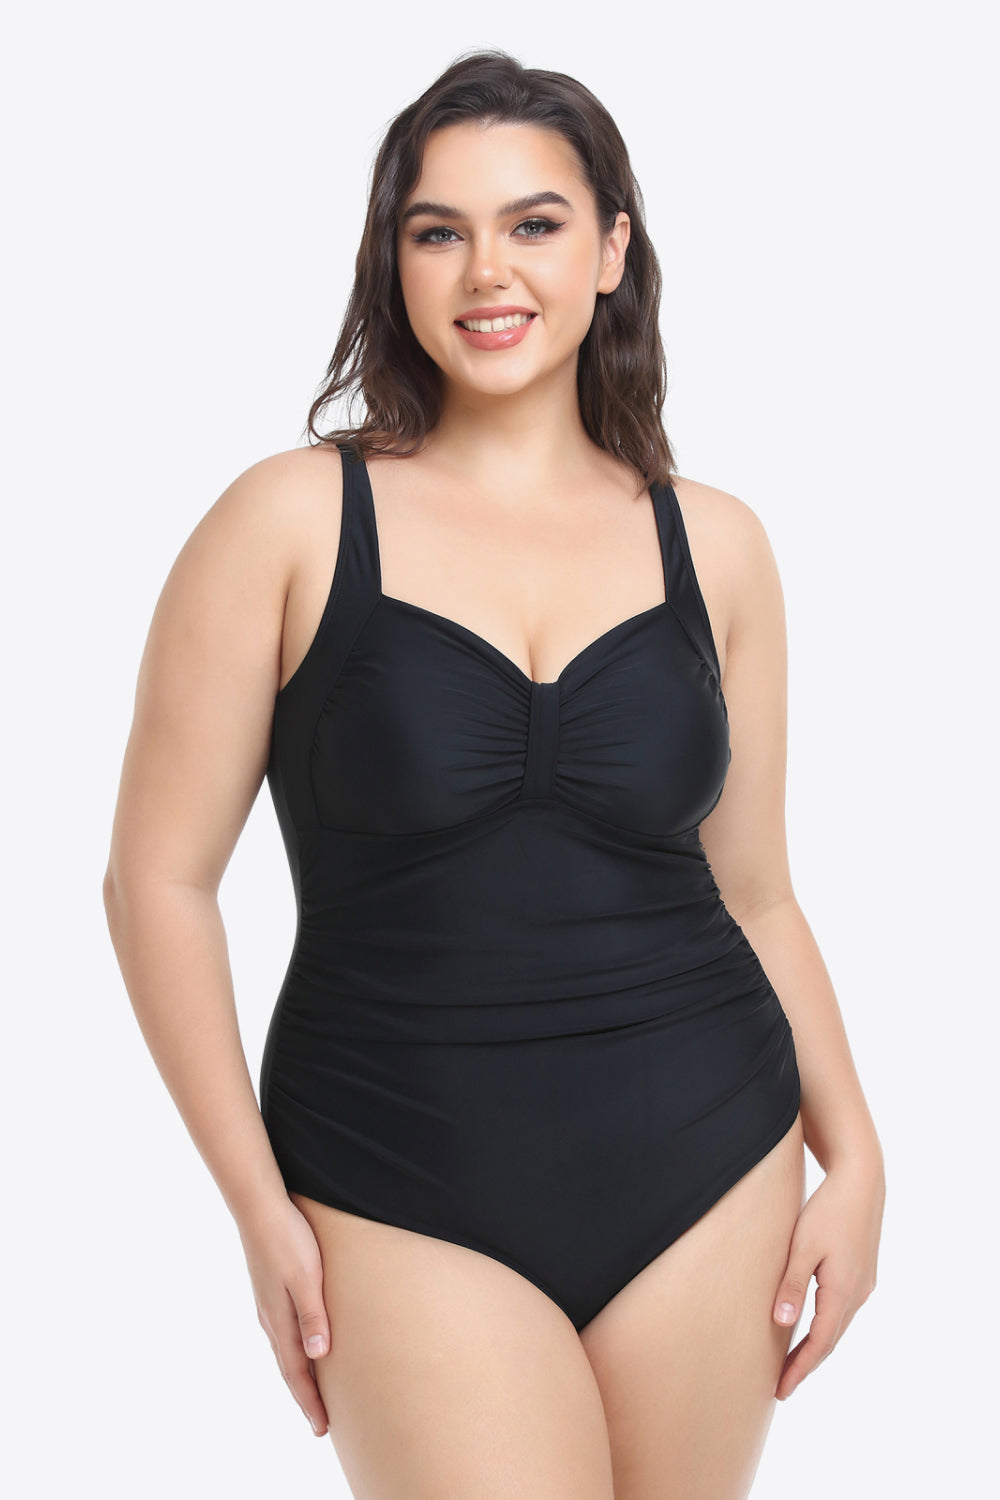 Plus Size Sleeveless Plunge One-Piece Swimsuit - Swimwear One-Pieces - FITGGINS